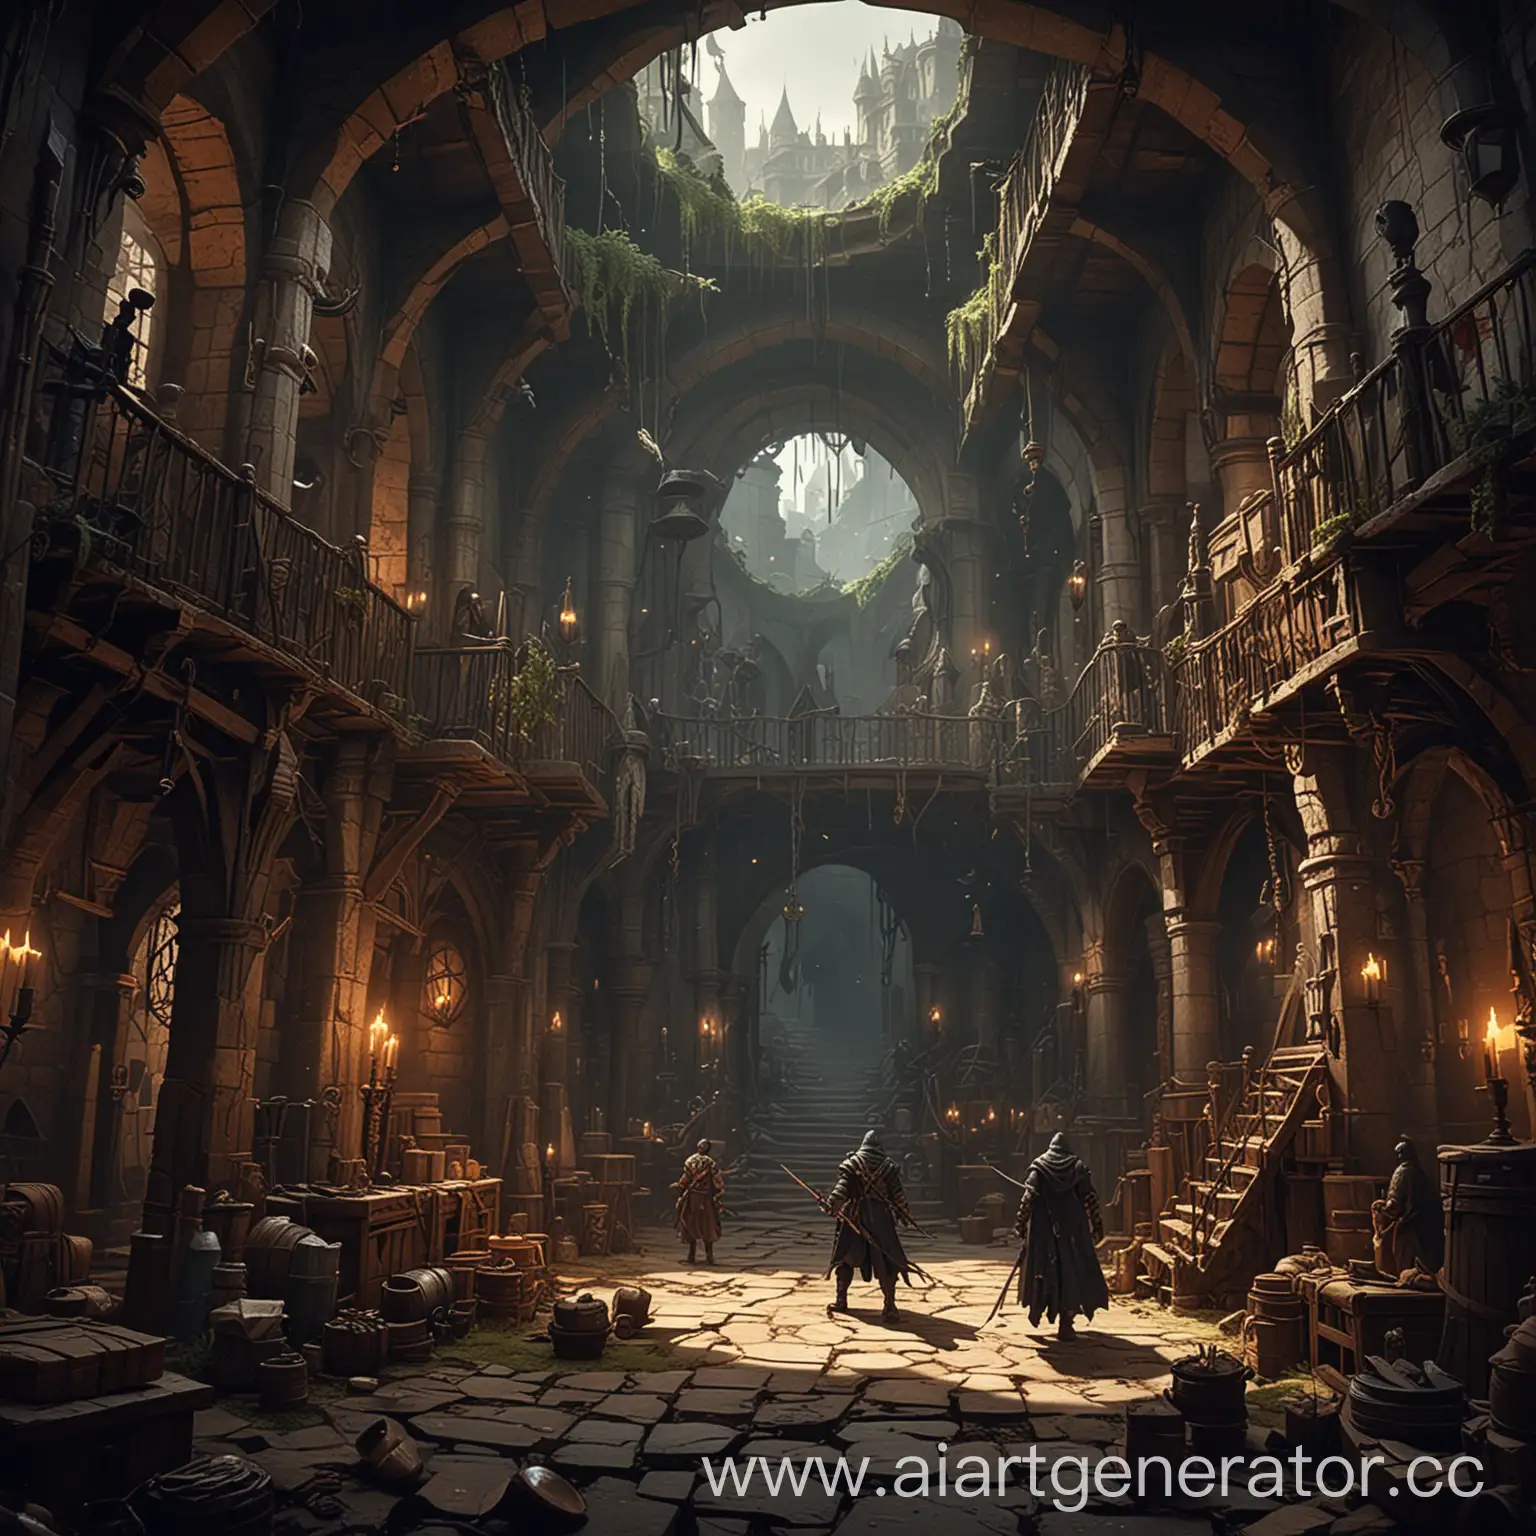 Medieval-Fantasy-Universe-with-Sorcerers-Warriors-Dungeons-Monsters-and-Treasures